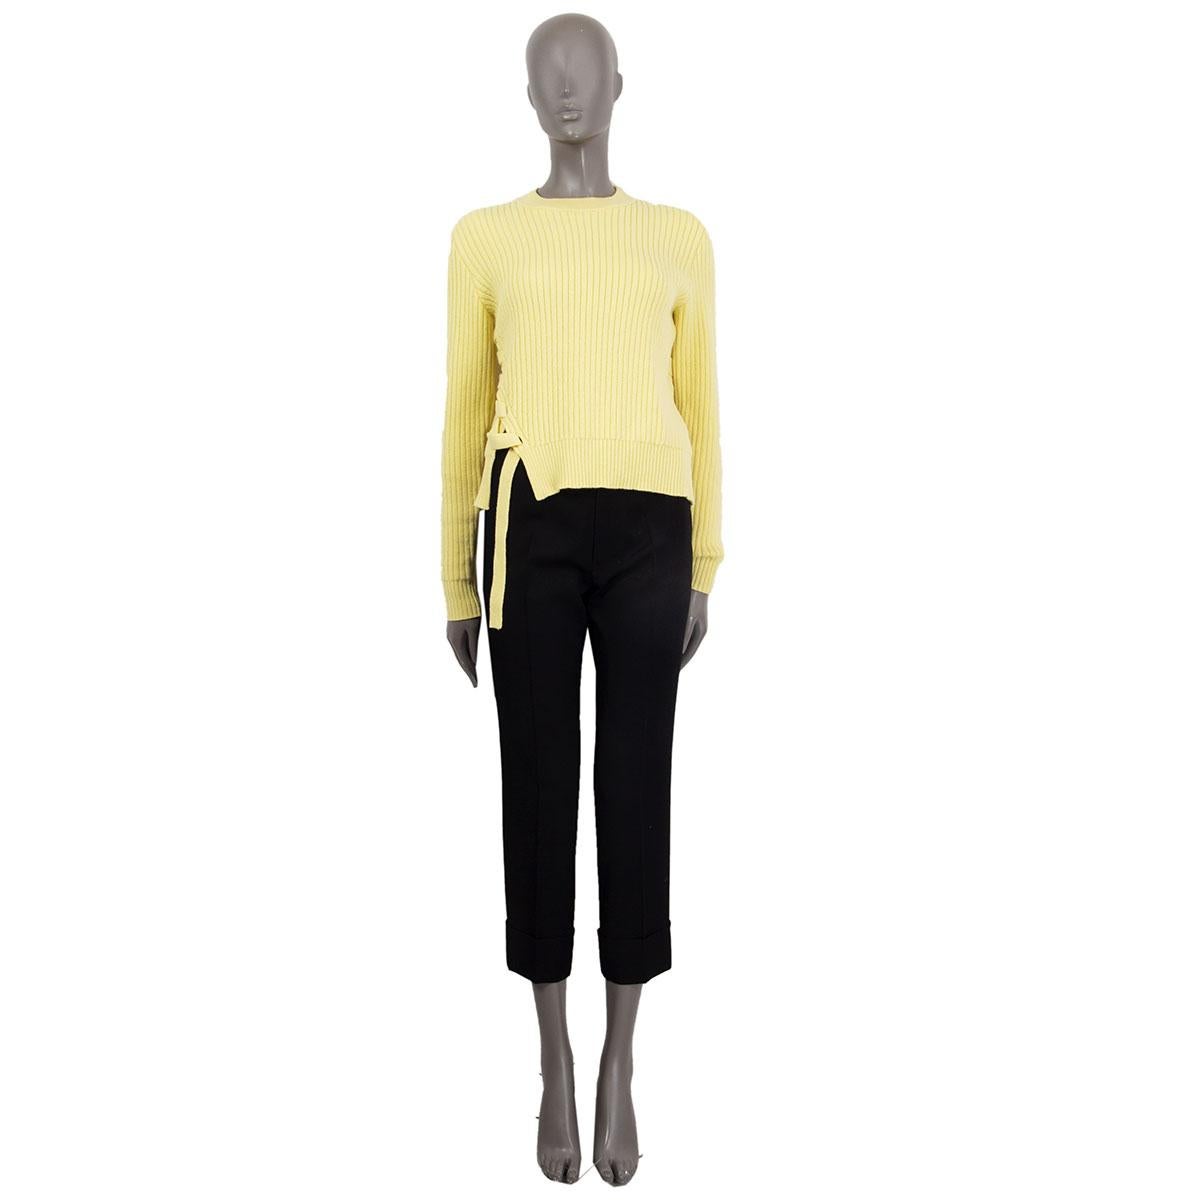 100% authentic Proenza Schouler rib crew-neck sweater in yellow wool (76%), cashmere (20%) and elastane (4%). Has lacing detail on the side. Has been worn and is in excellent condition. 

Measurements
Tag Size	S
Size	S
Shoulder Width	42cm